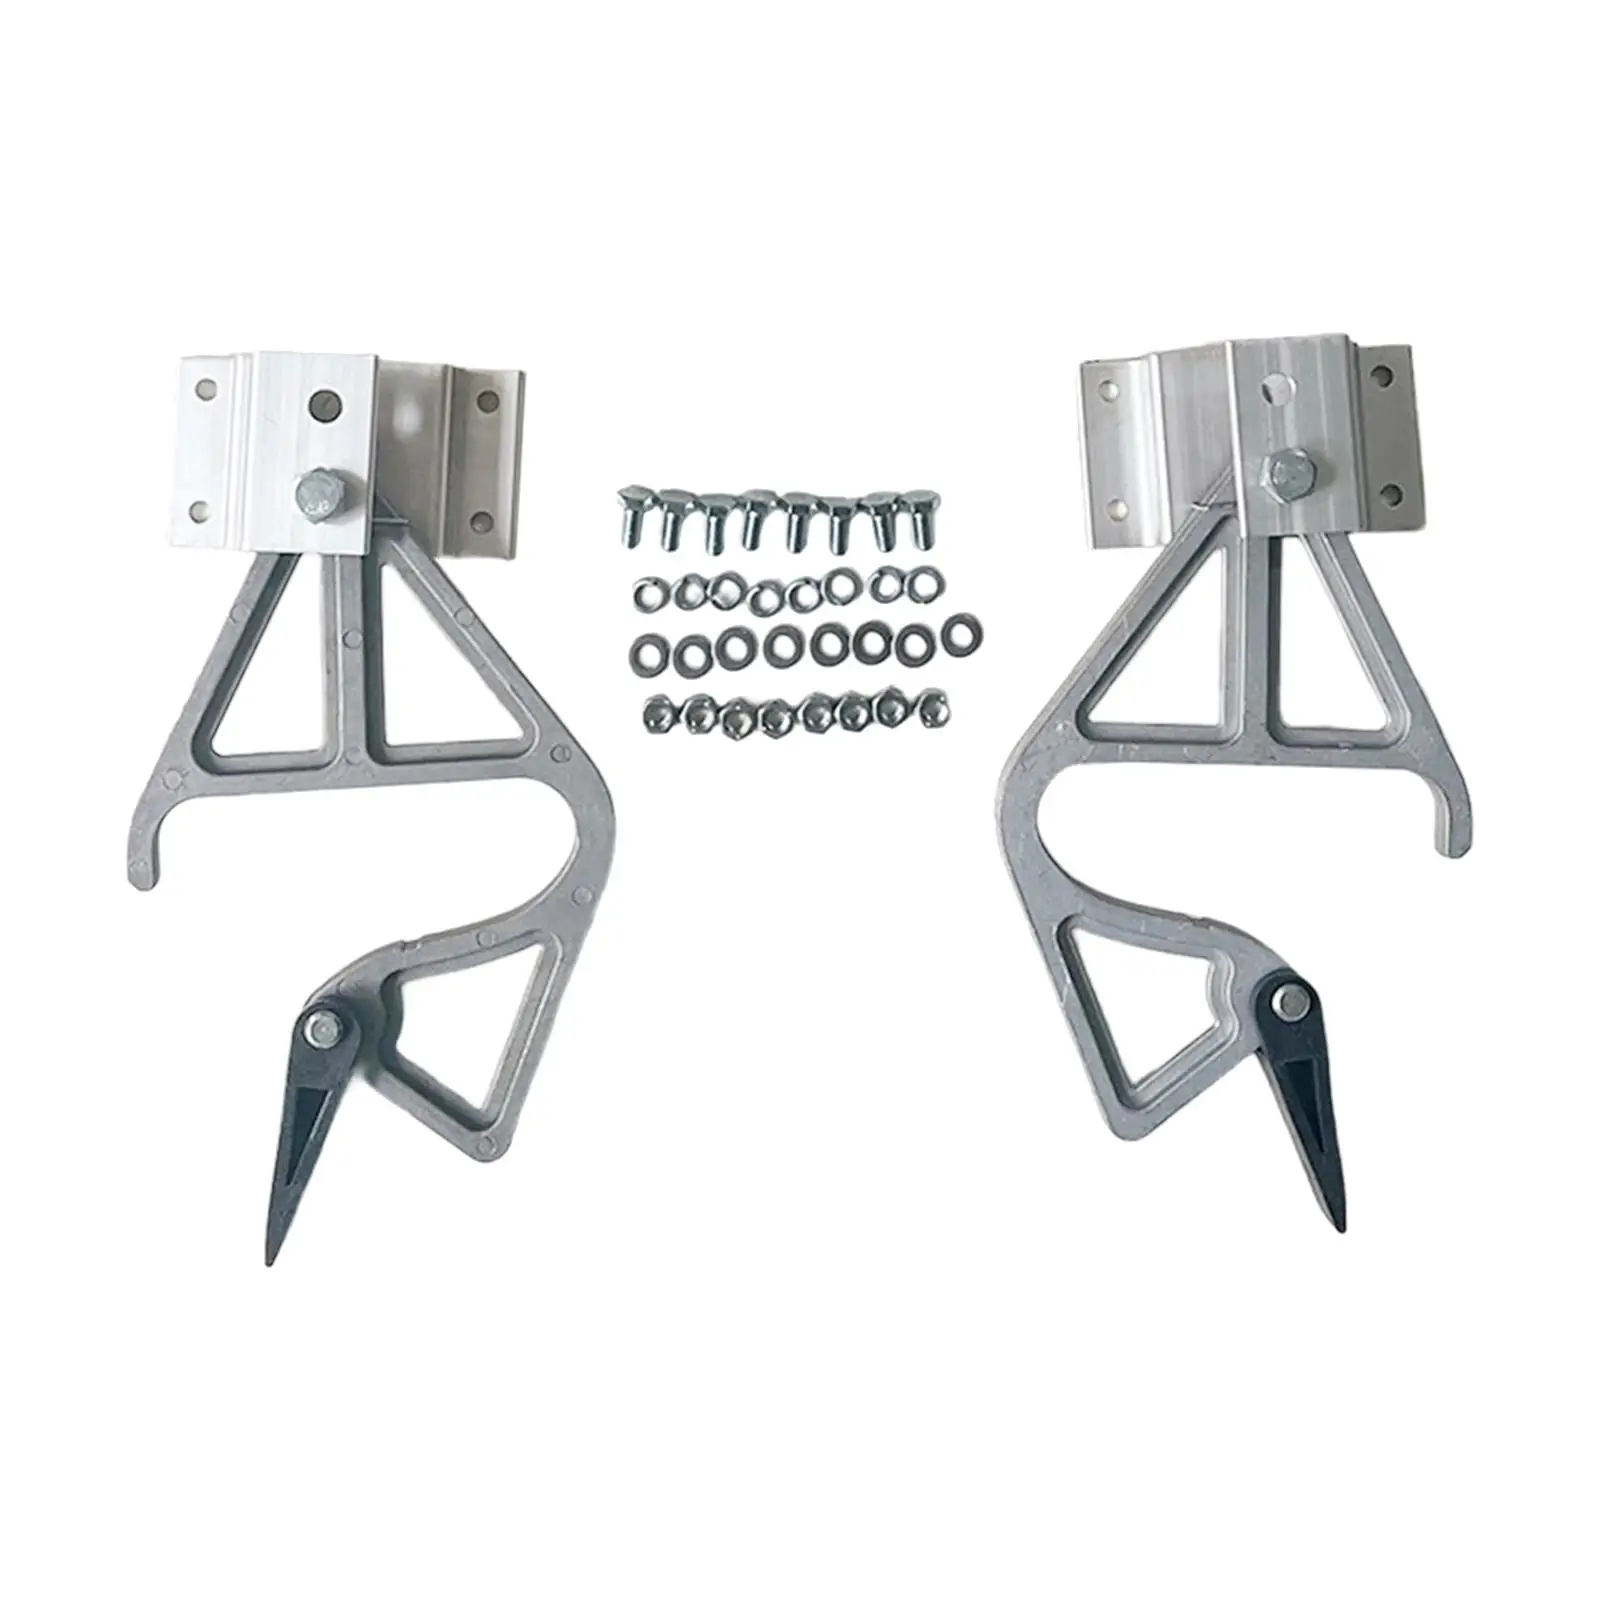 Extension Ladder Rung Lock Kit for 28-11 Quality Accessories